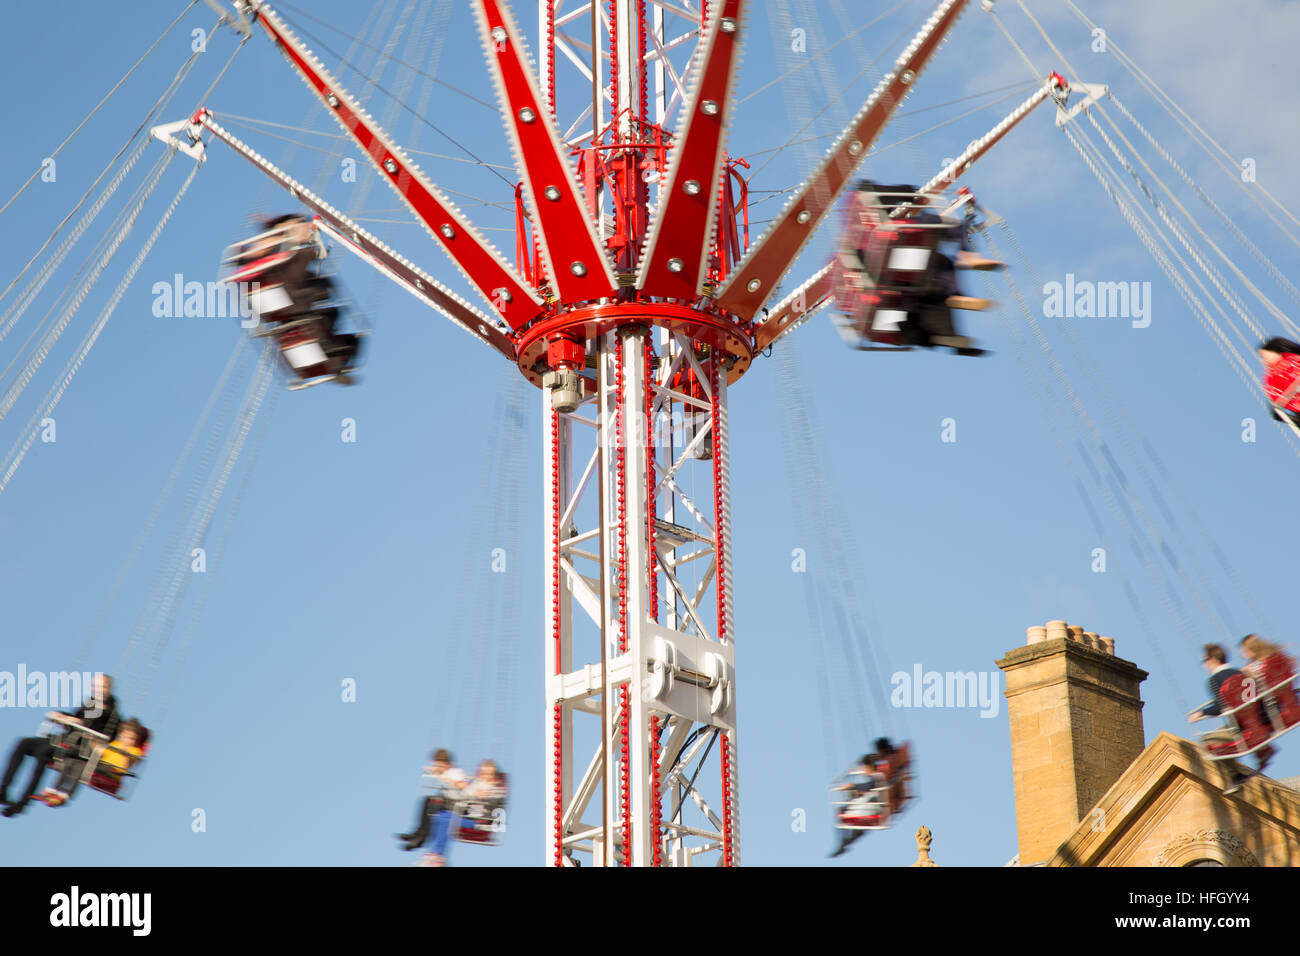 People enjoying the Skyrider at St Giles Fair Oxford as they swing round the central column against a blue sky background. Stock Photo